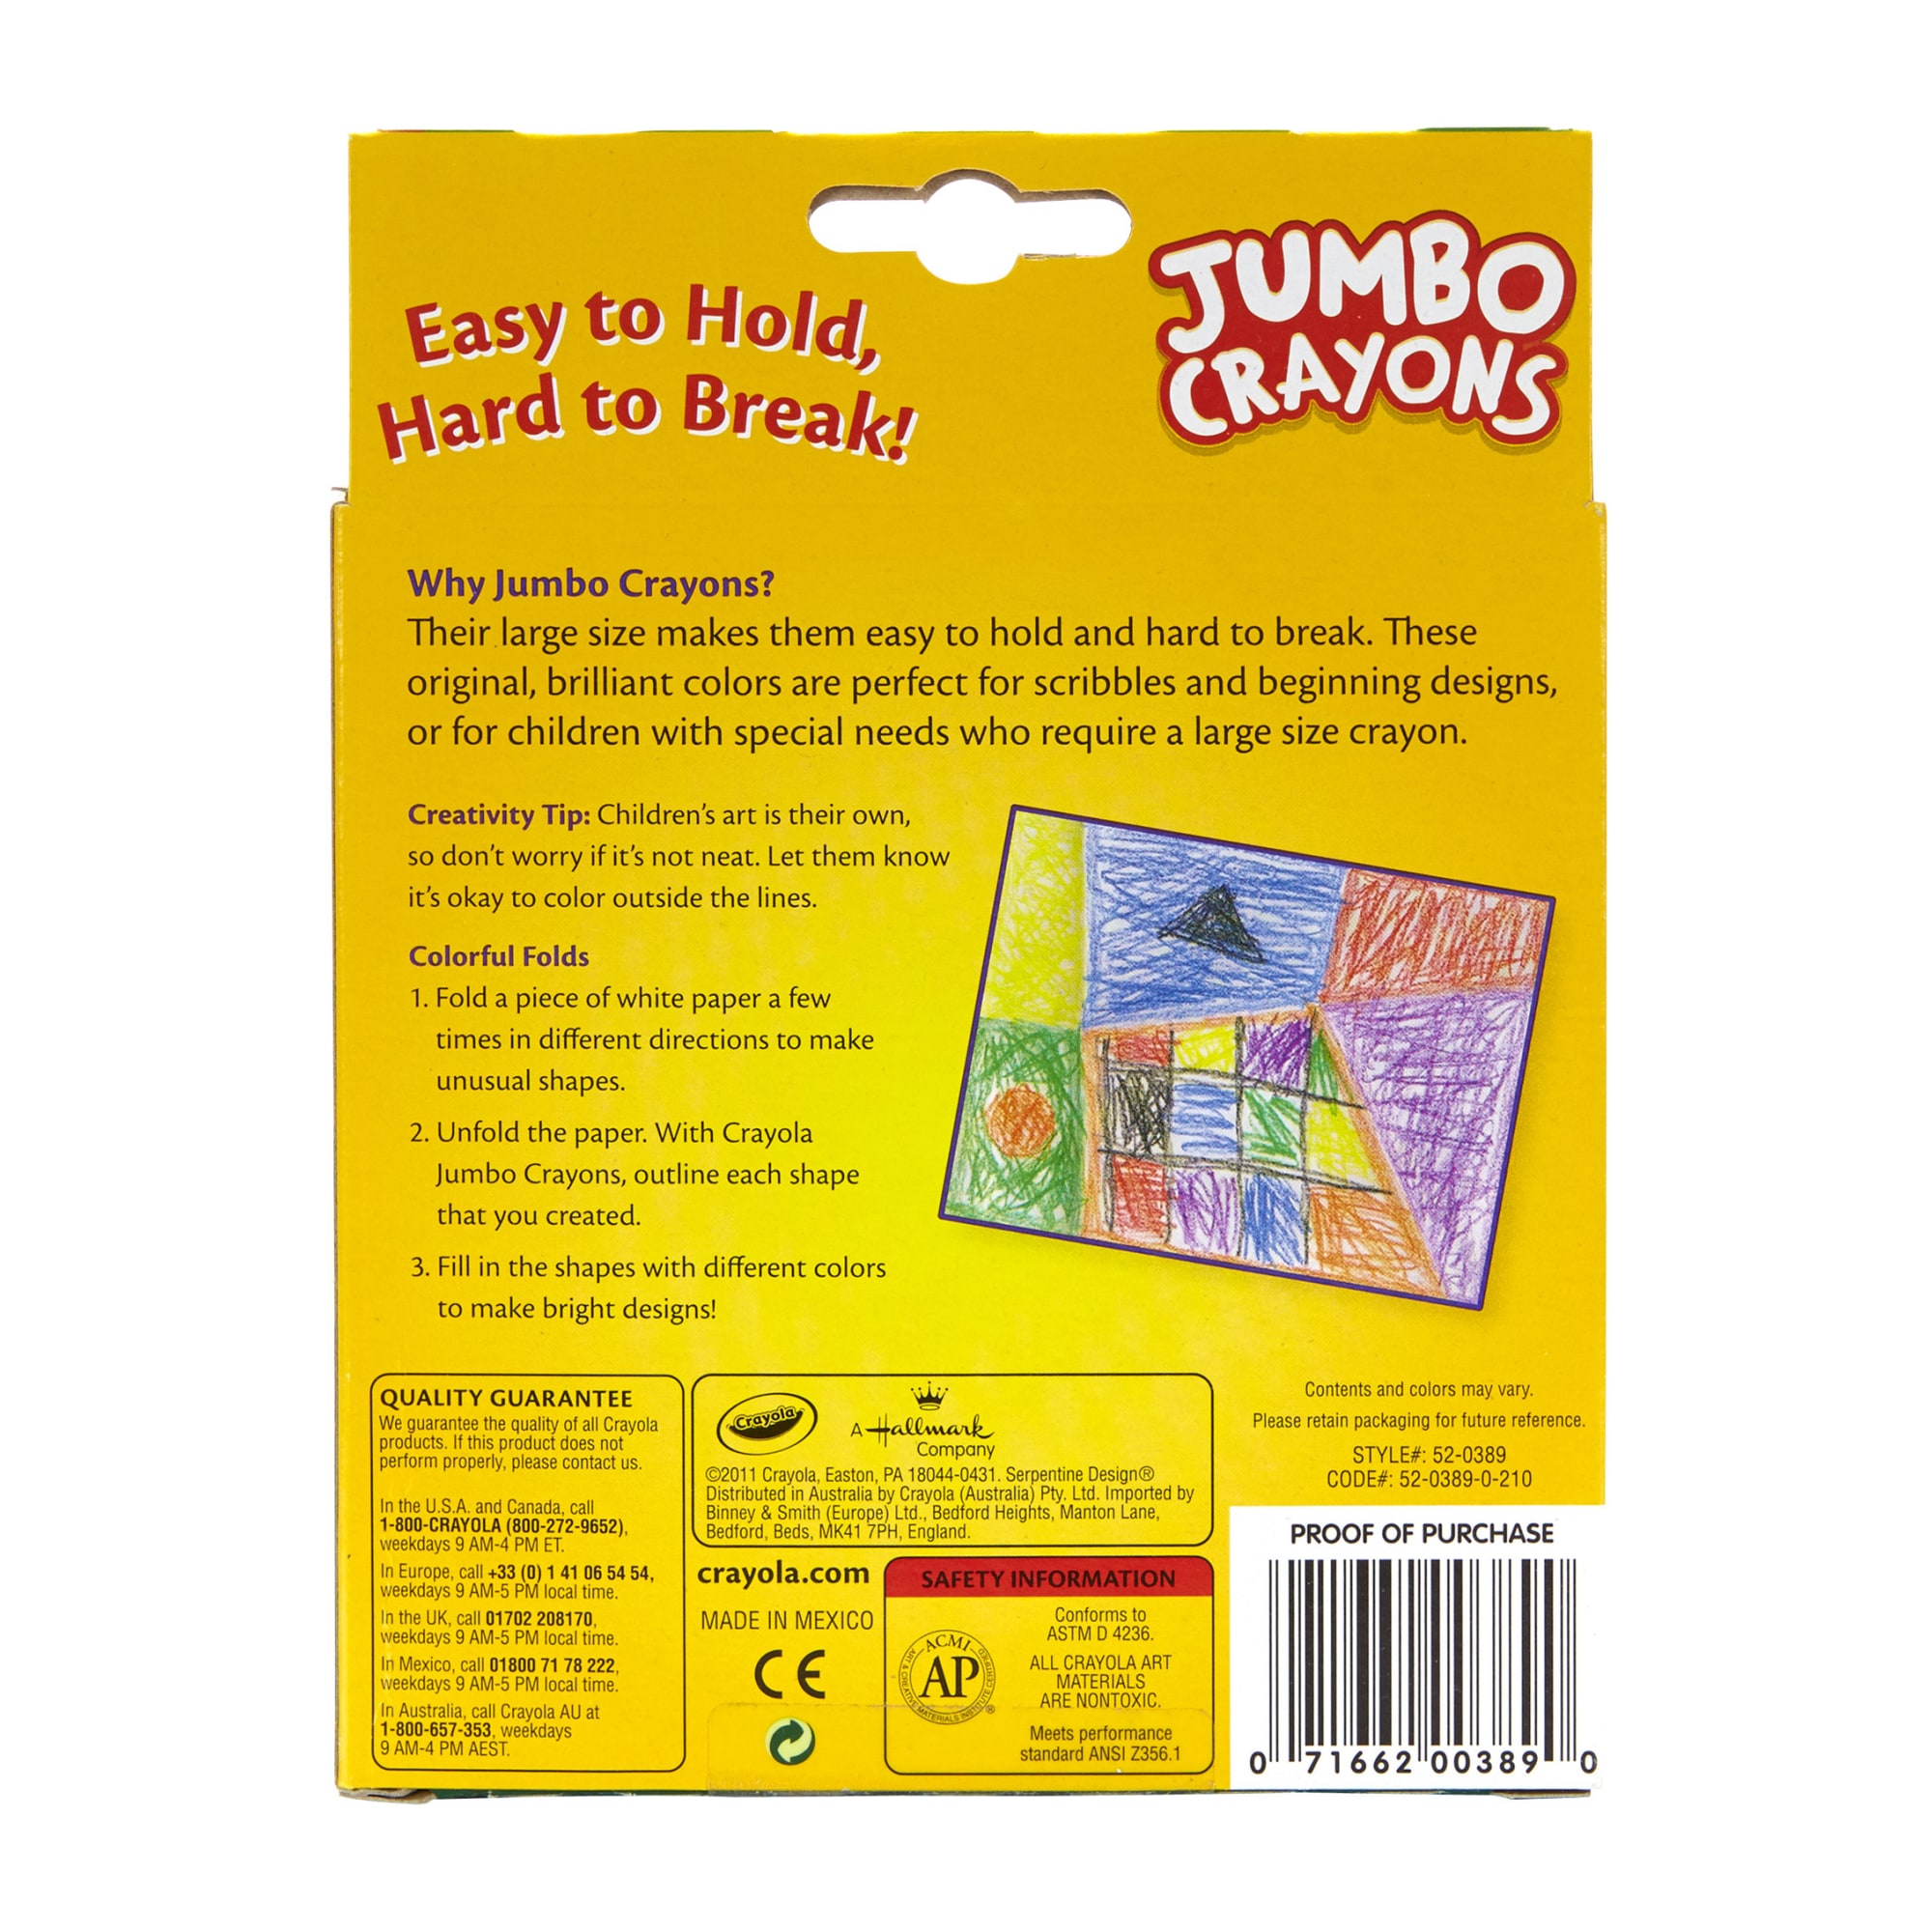 Crayola Jumbo Size Crayons for Toddlers, 8 Count, Easter Basket Stuffers for Toddlers, Gifts - image 3 of 10